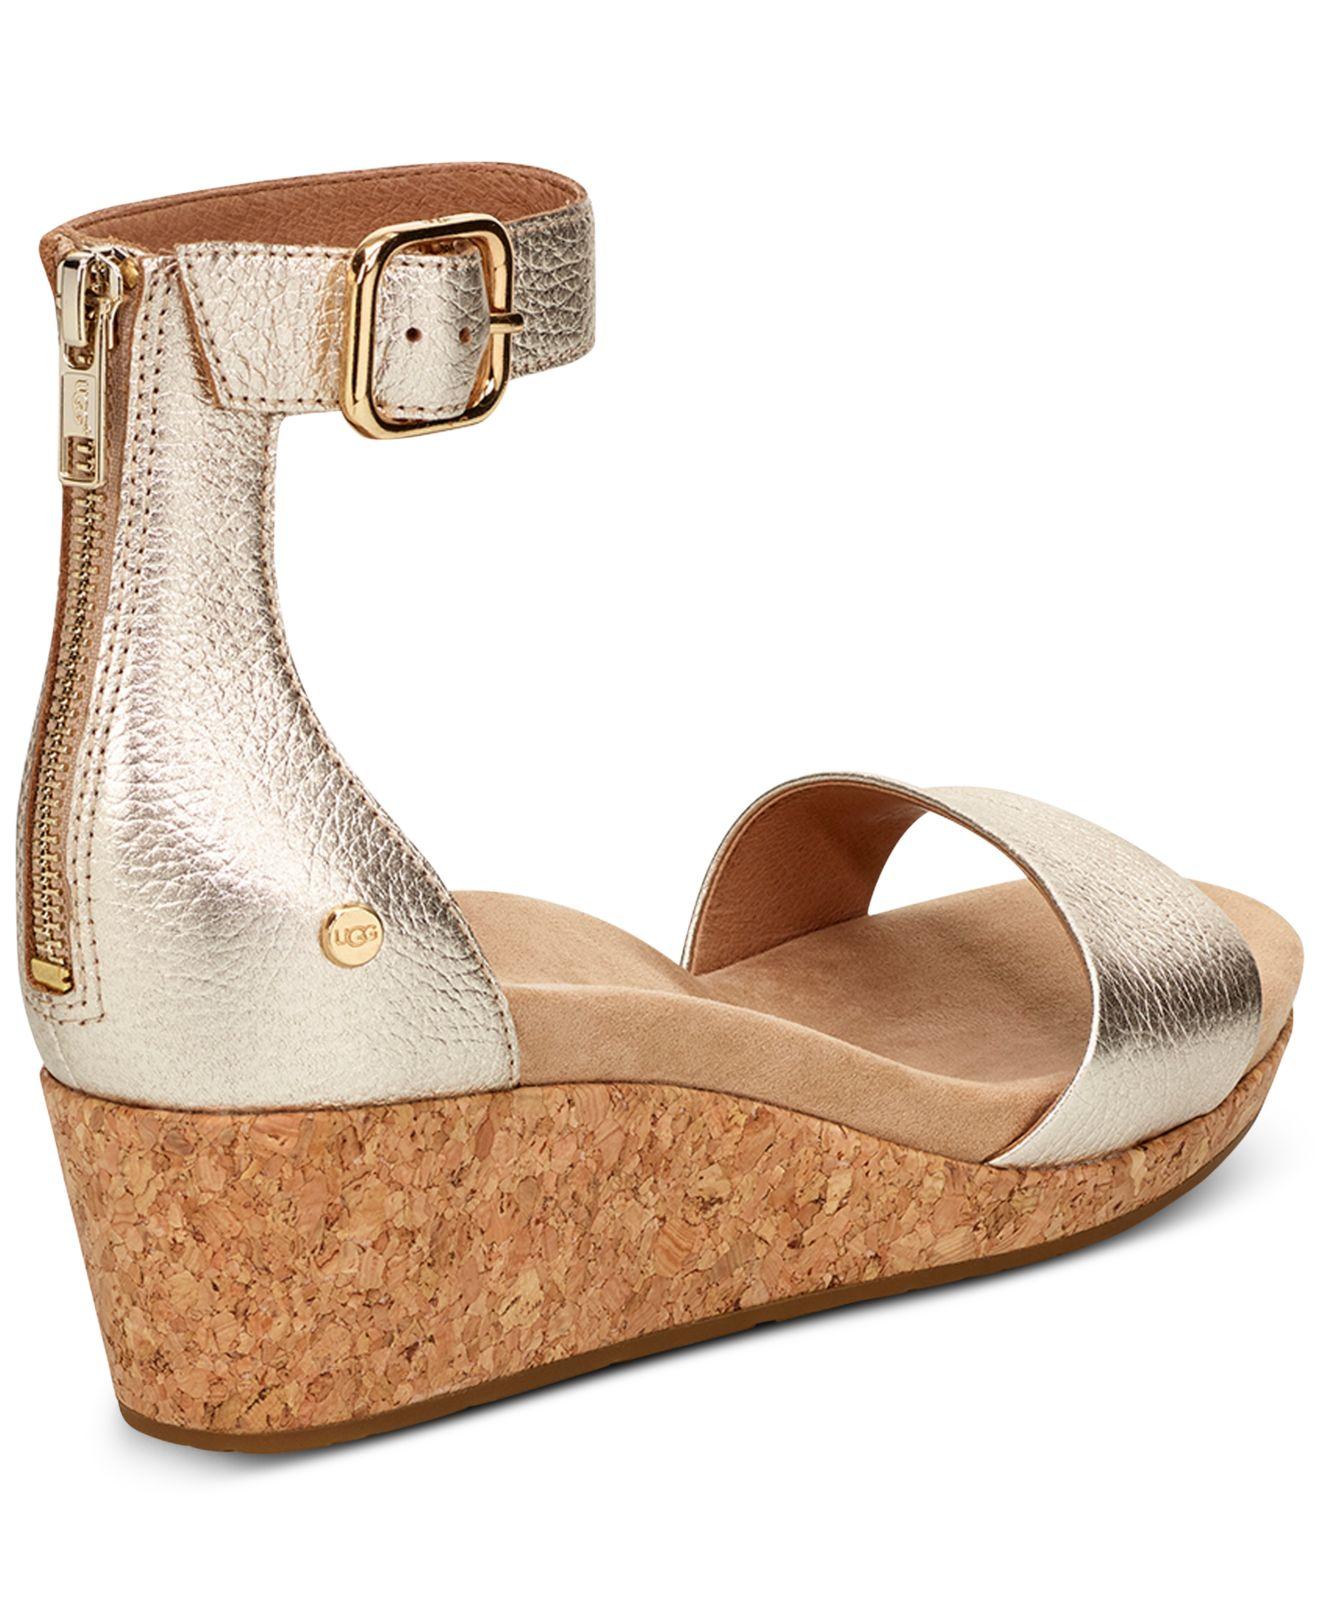 UGG Zoe Leather Wedge Sandals in Gold (Metallic) | Lyst